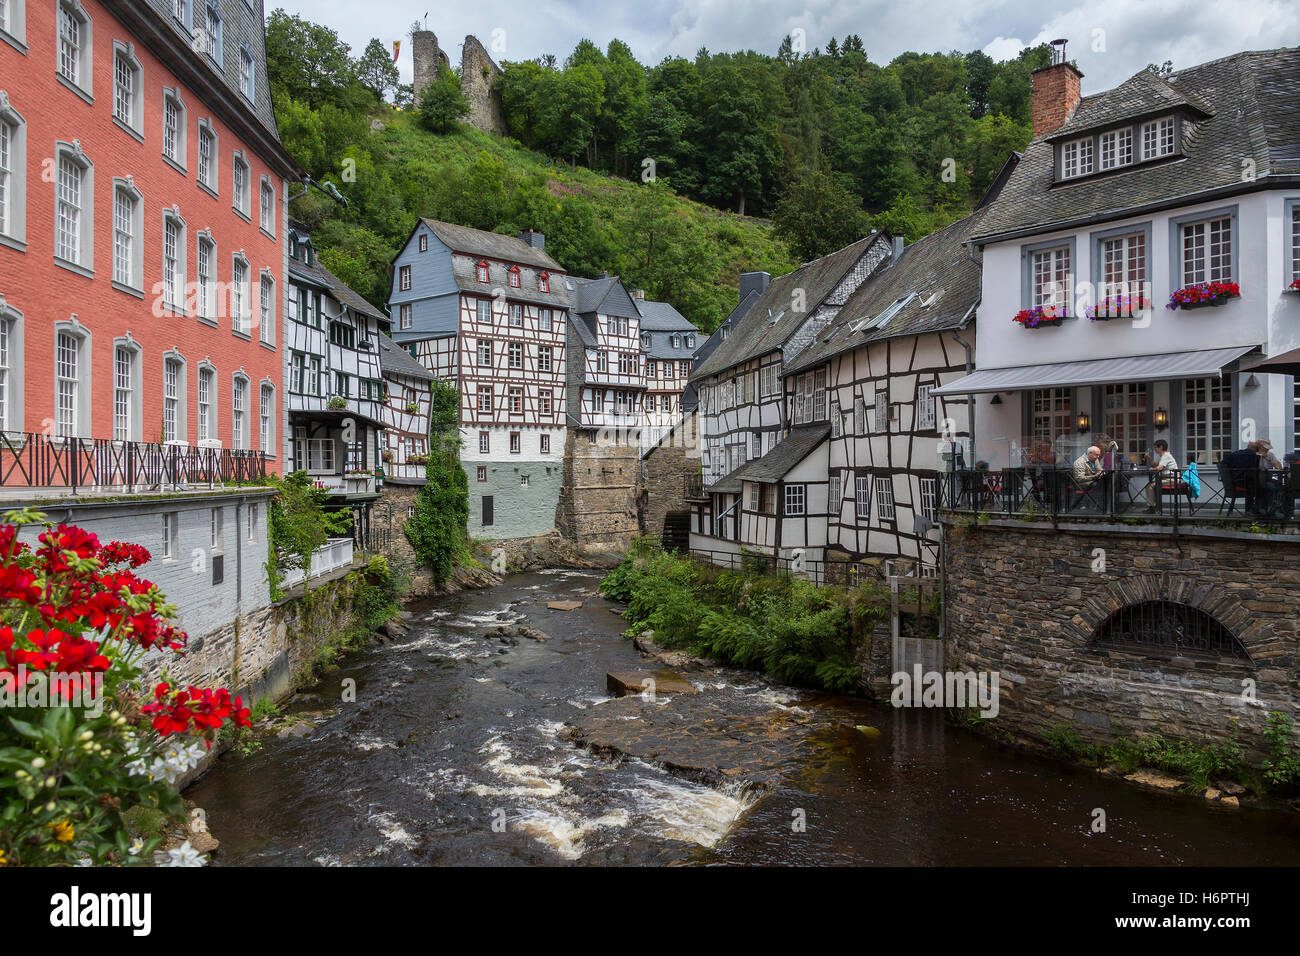 Monschau - A picturesque town in the hills of the North Eifel Nature Park in the narrow valley of the Rur river in Germany. Stock Photo